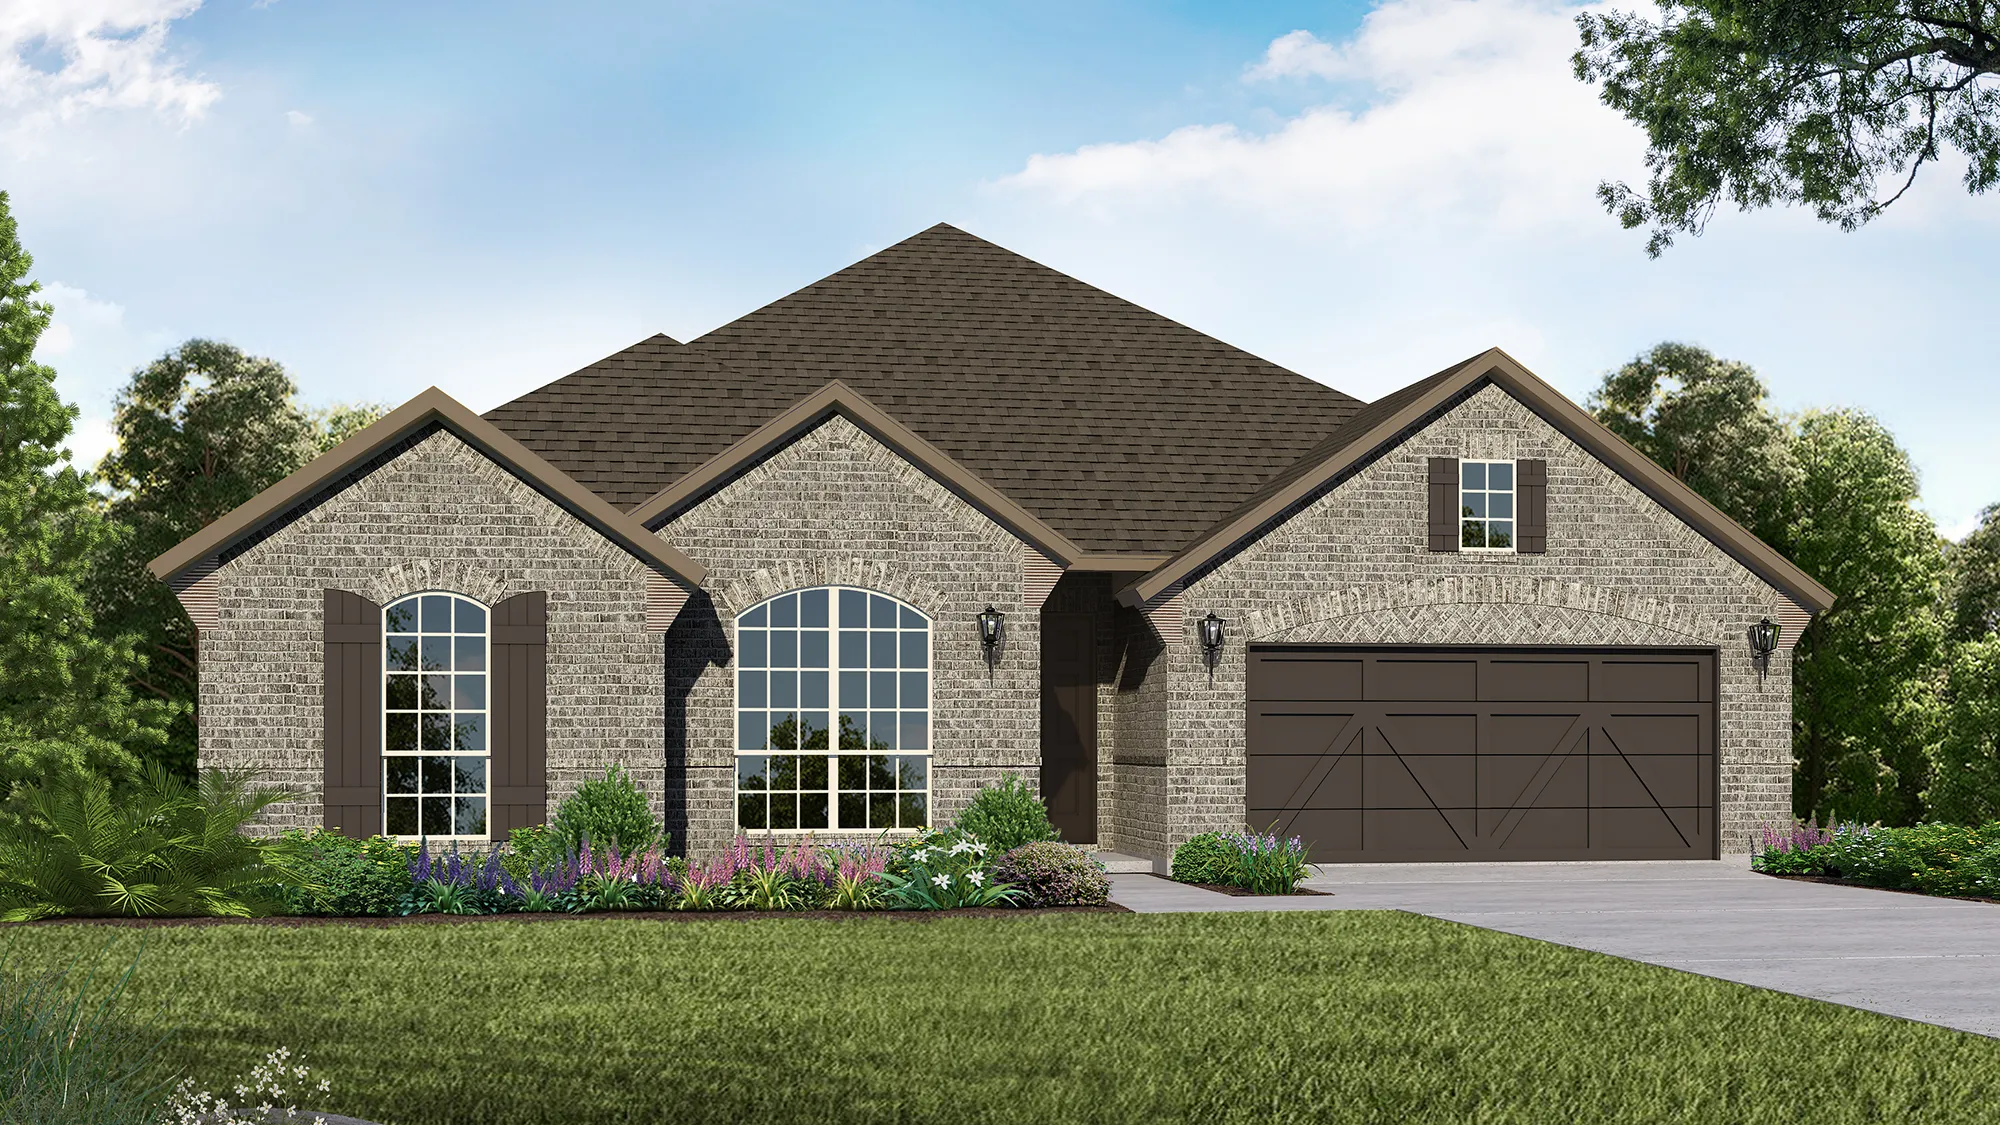 Plan 1685 Elevation A by American Legend Homes